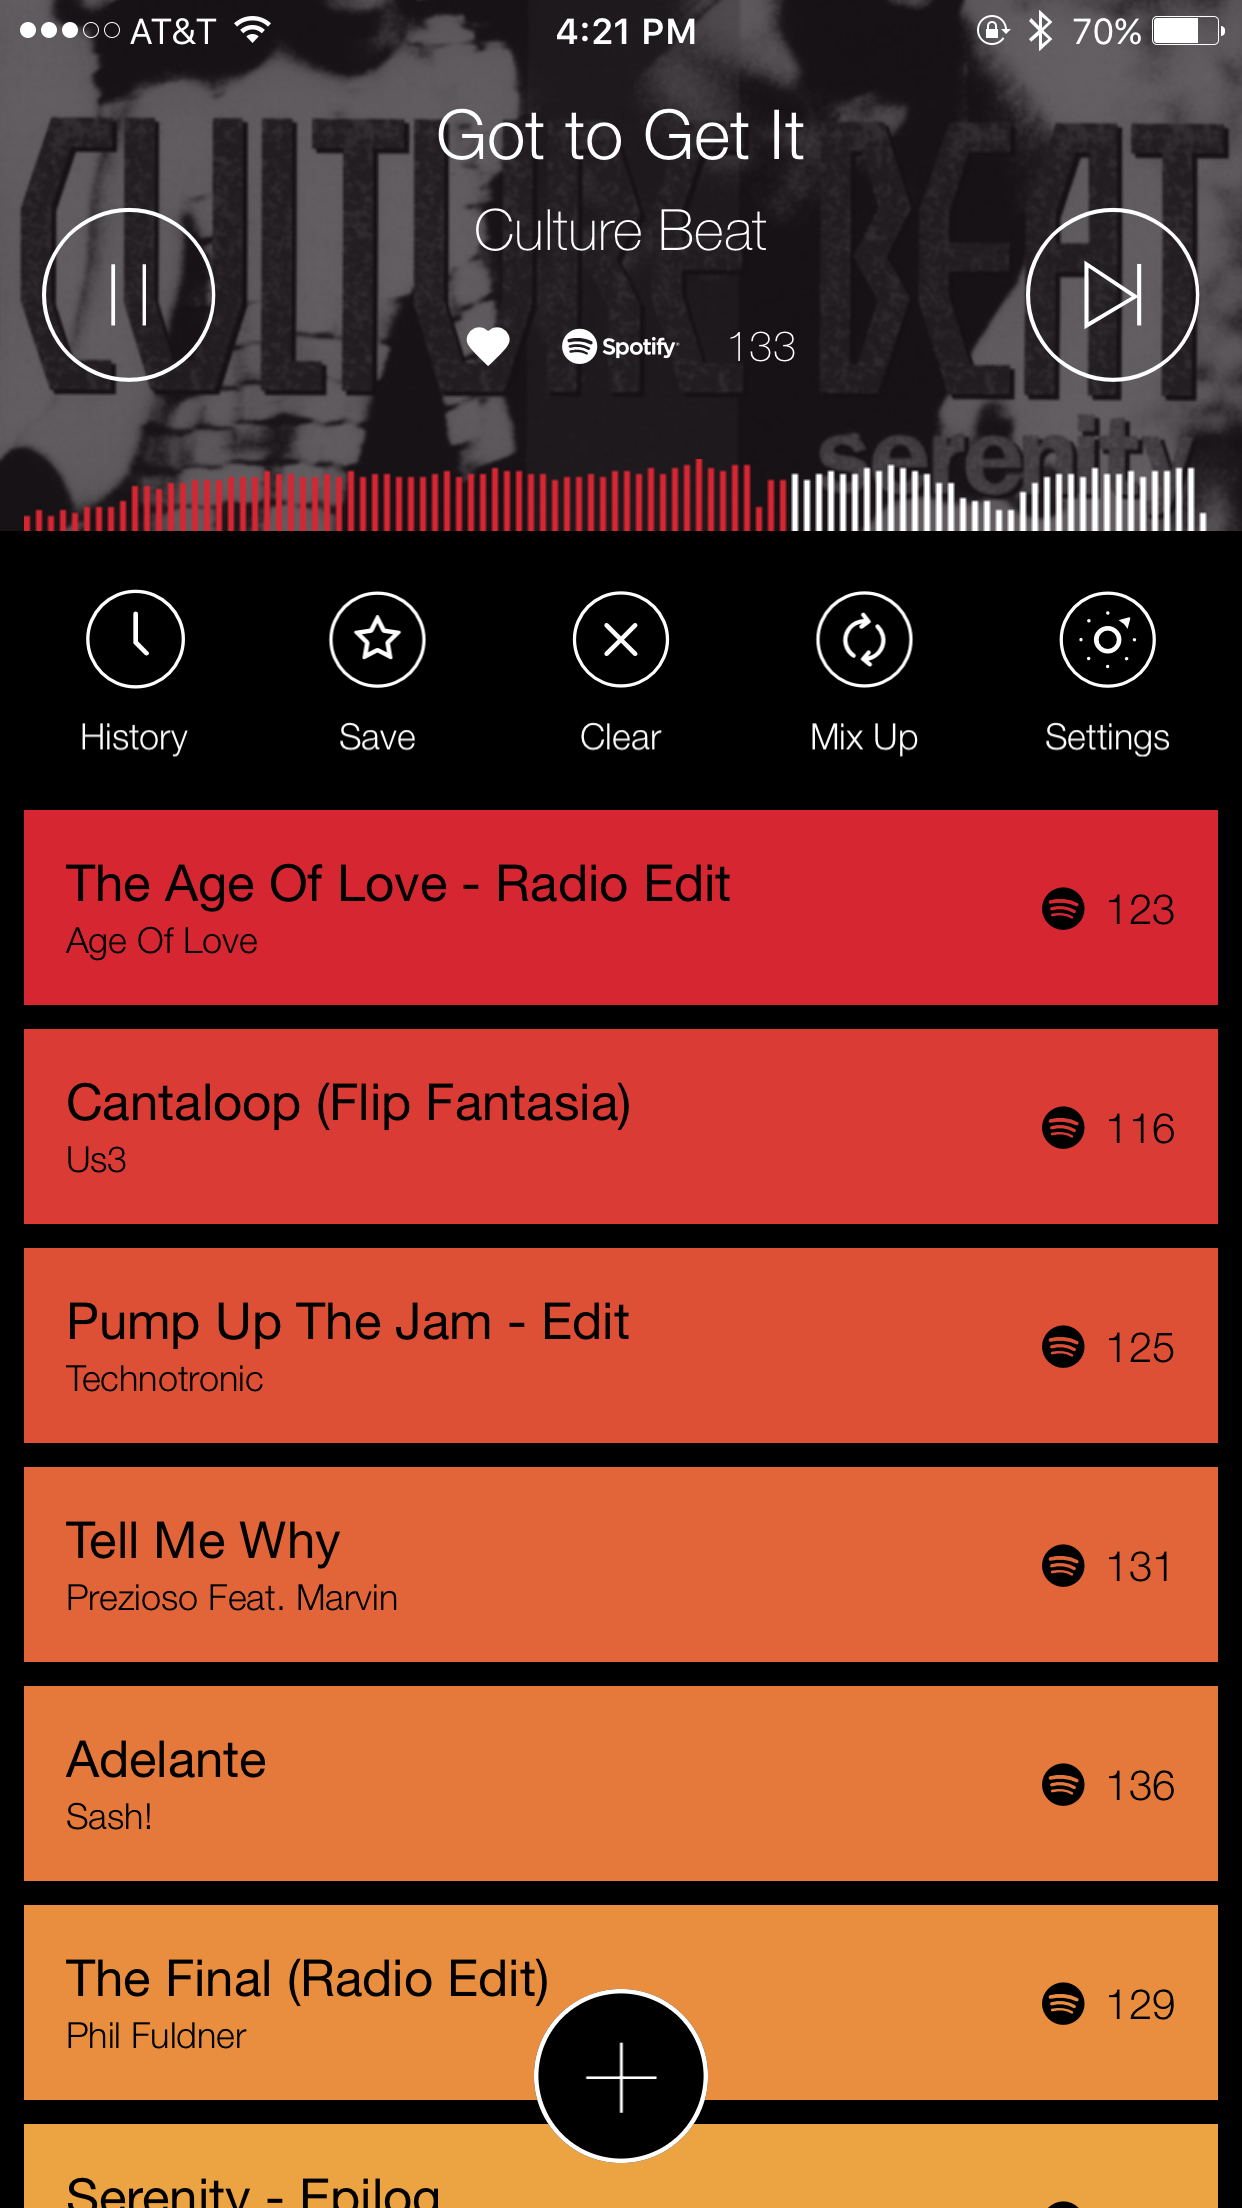 Mobile DJ Player and Song Curation Tool